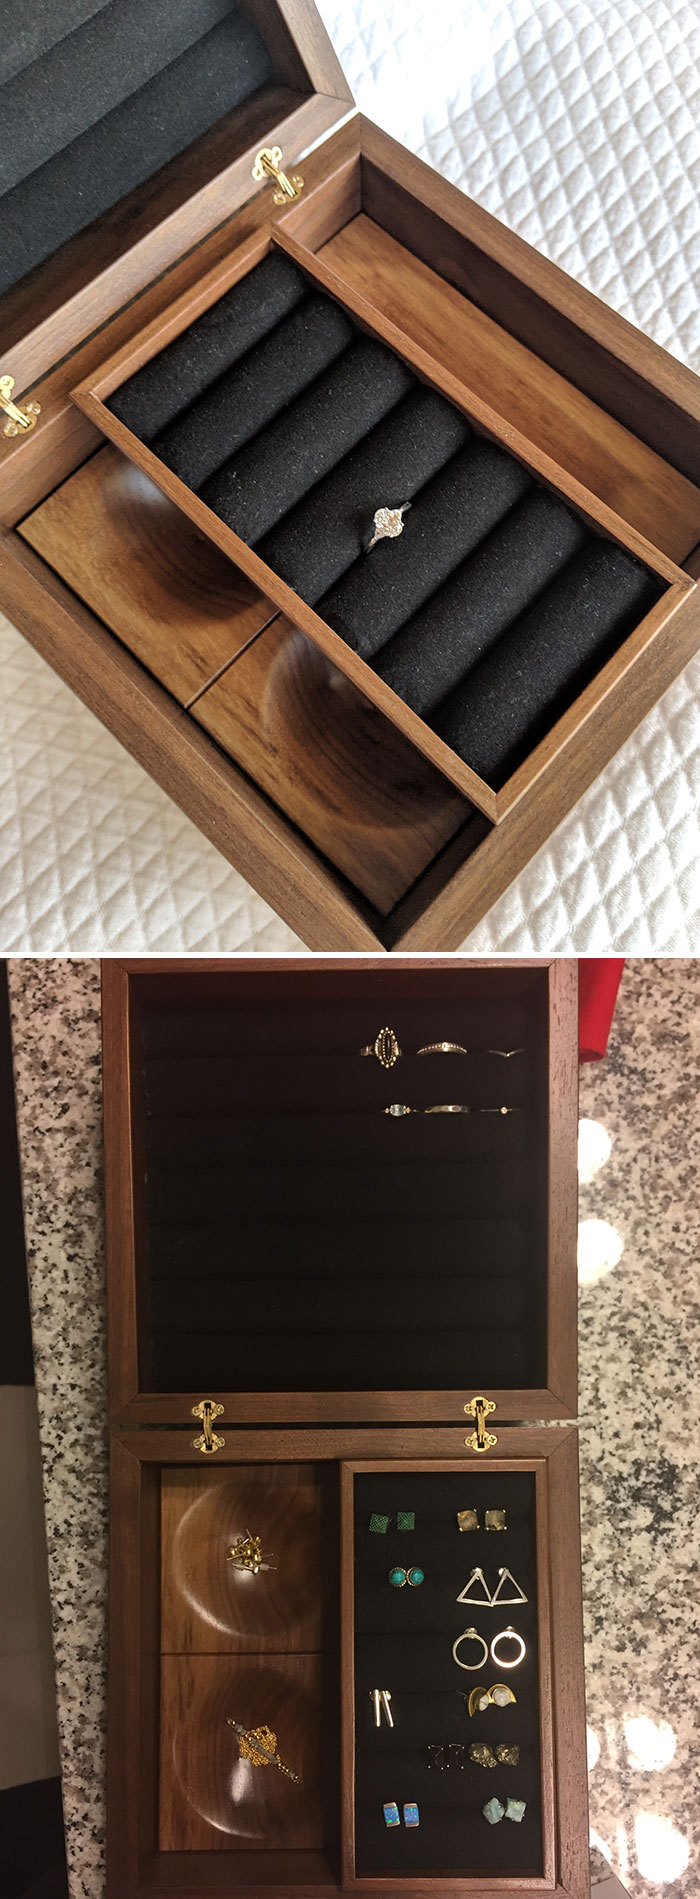 I Made My Girlfriend A Jewelry Box For Her Birthday With A Surprise Inside... She Said Yes